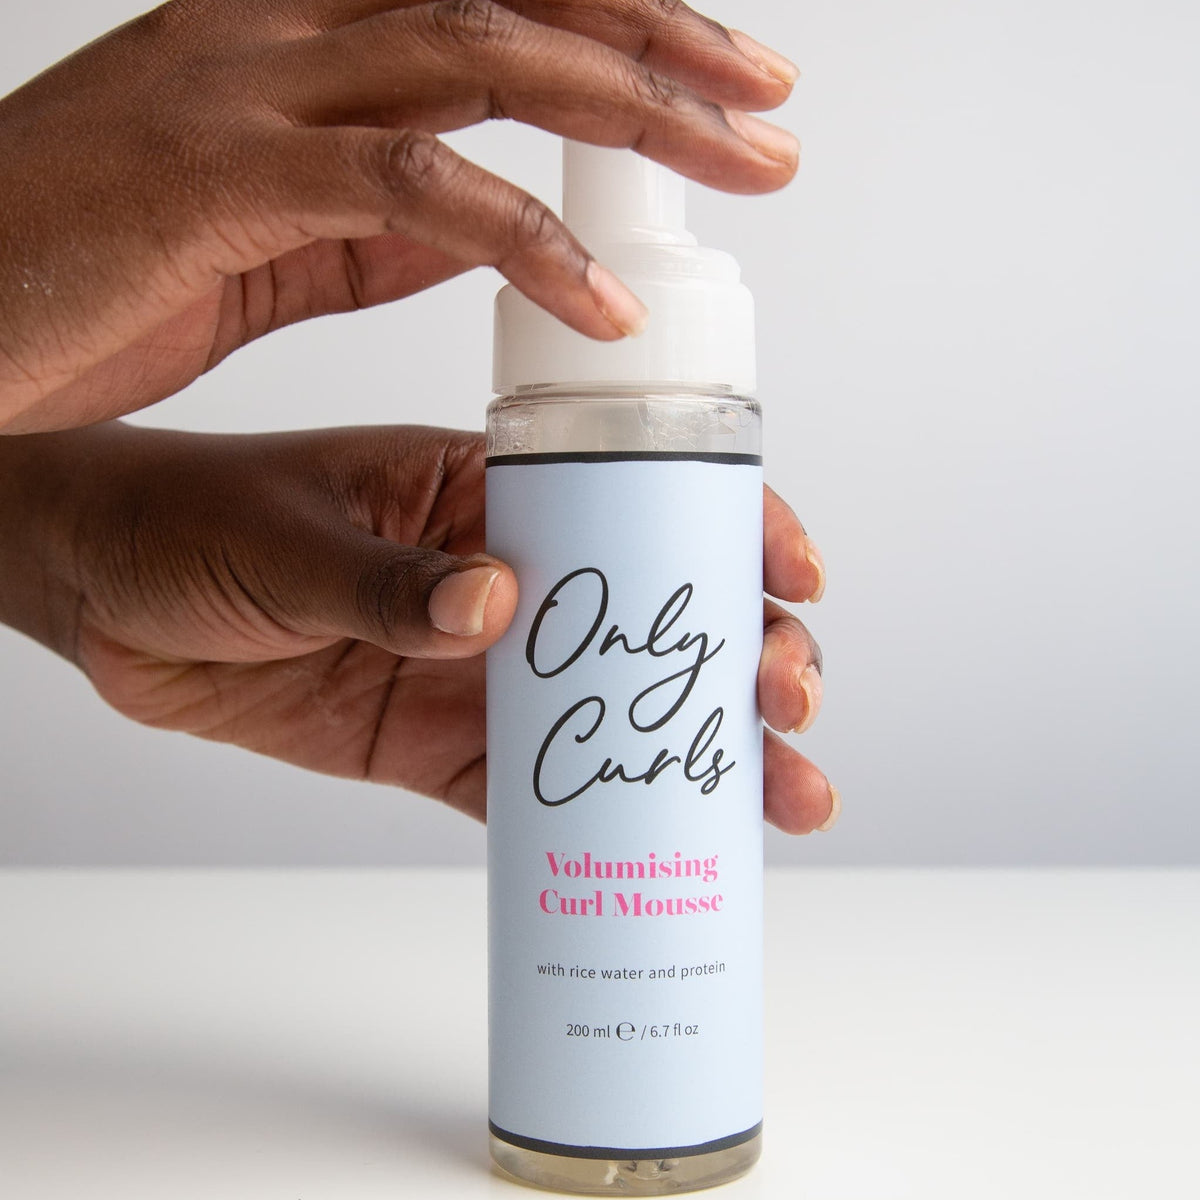 Only Curls Volumising Curl Mousse - Only Curls